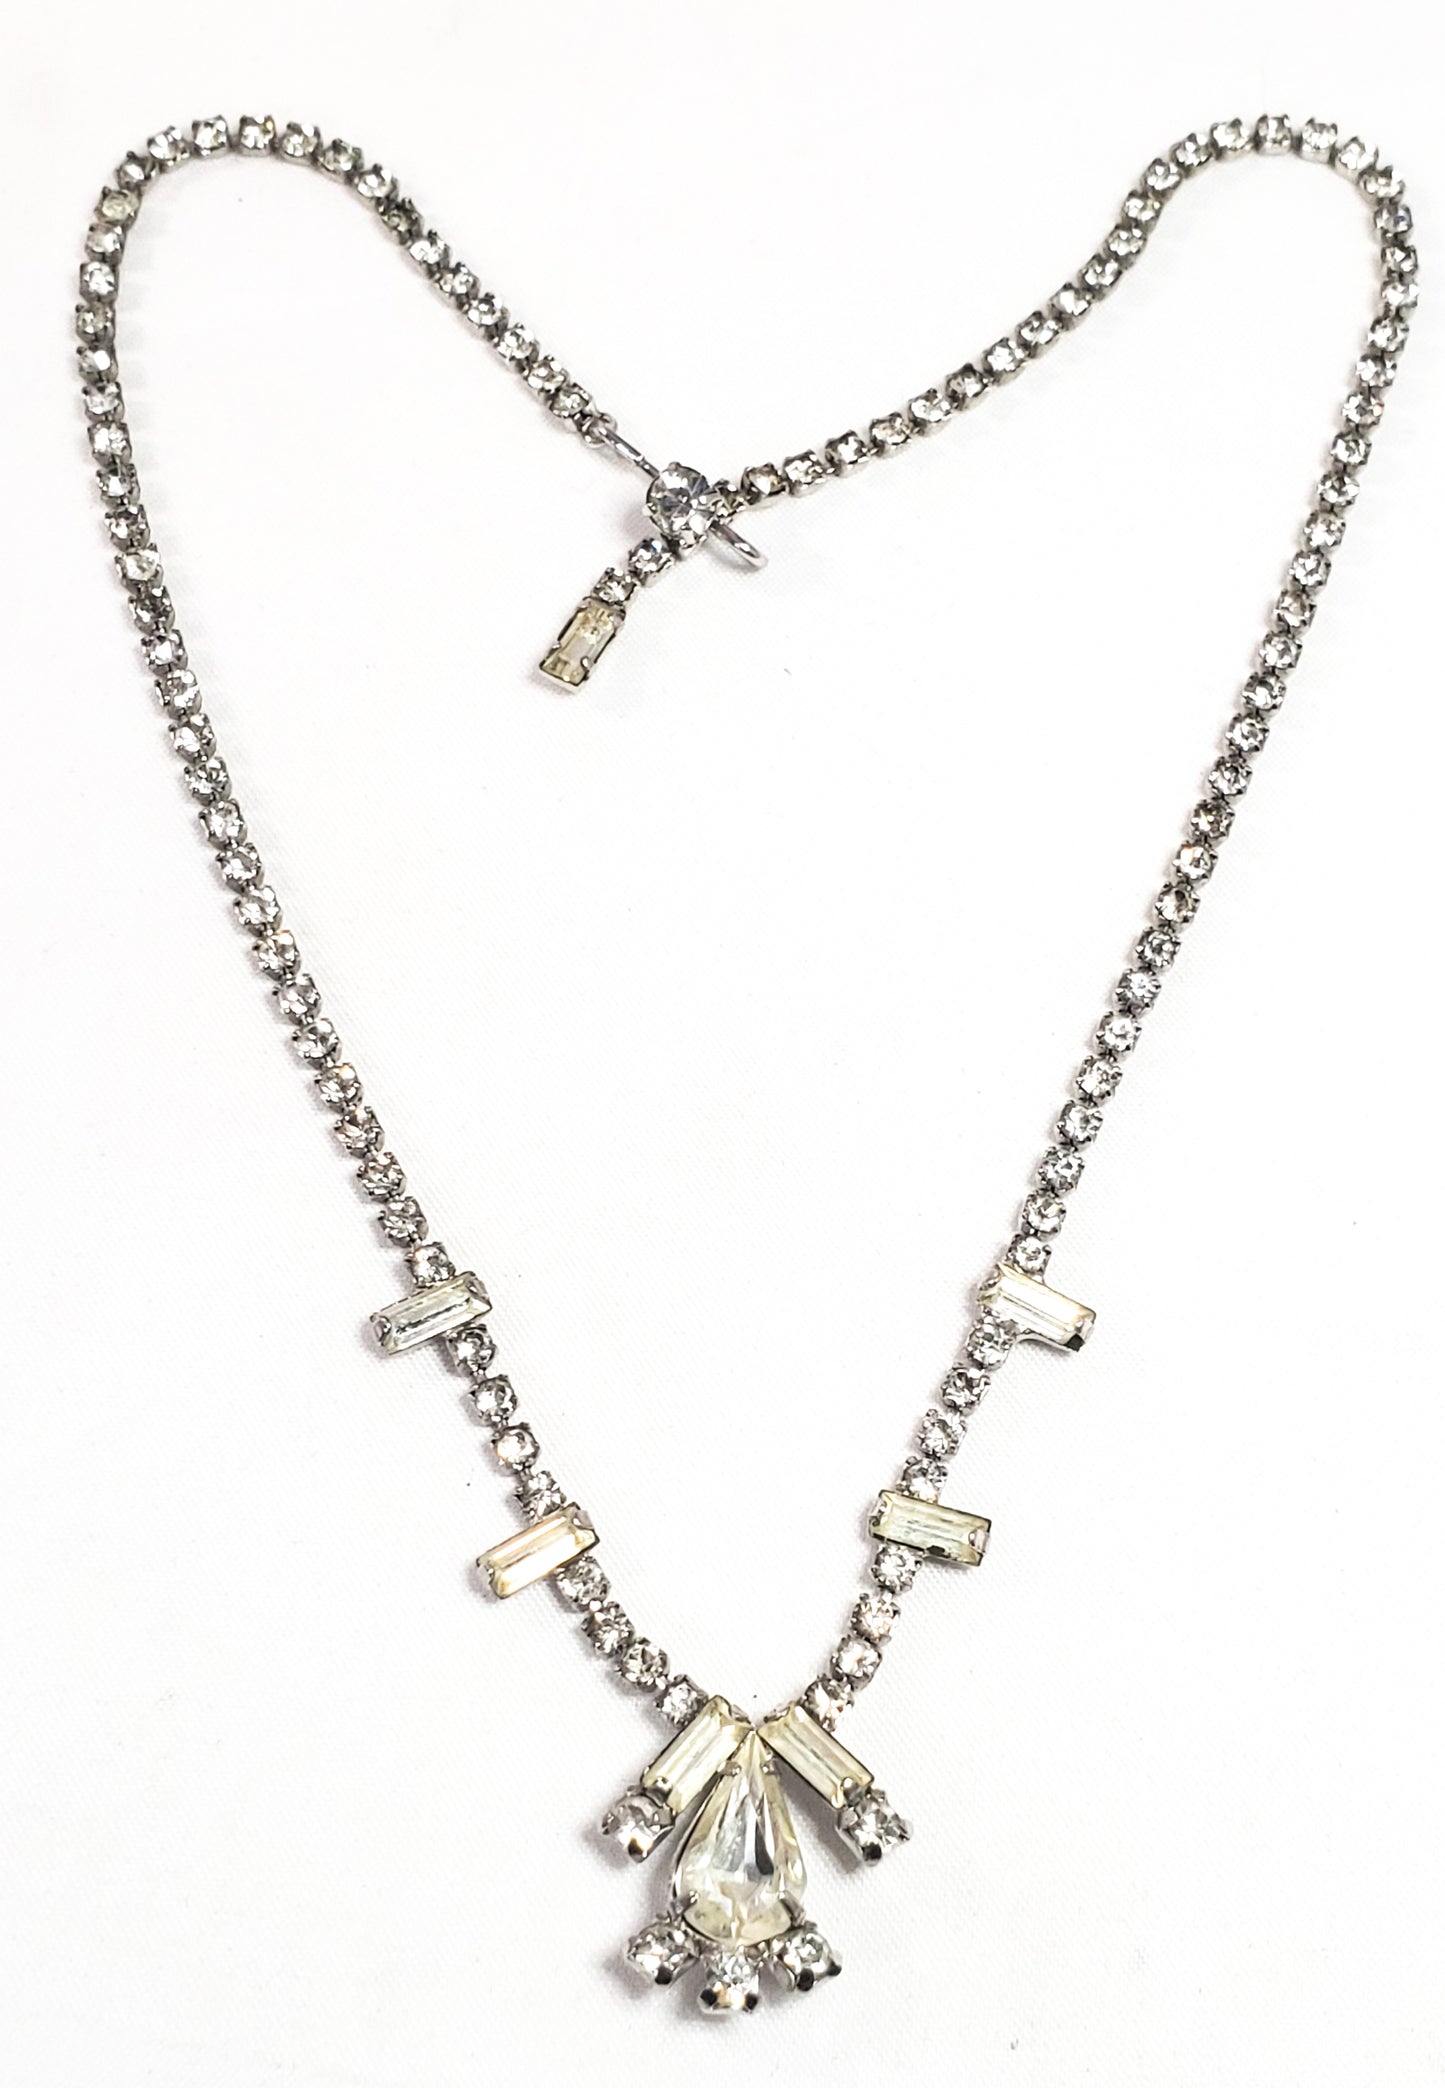 Weiss teardrop and baguette clear sparkling rhinestone necklace mid century 1950's